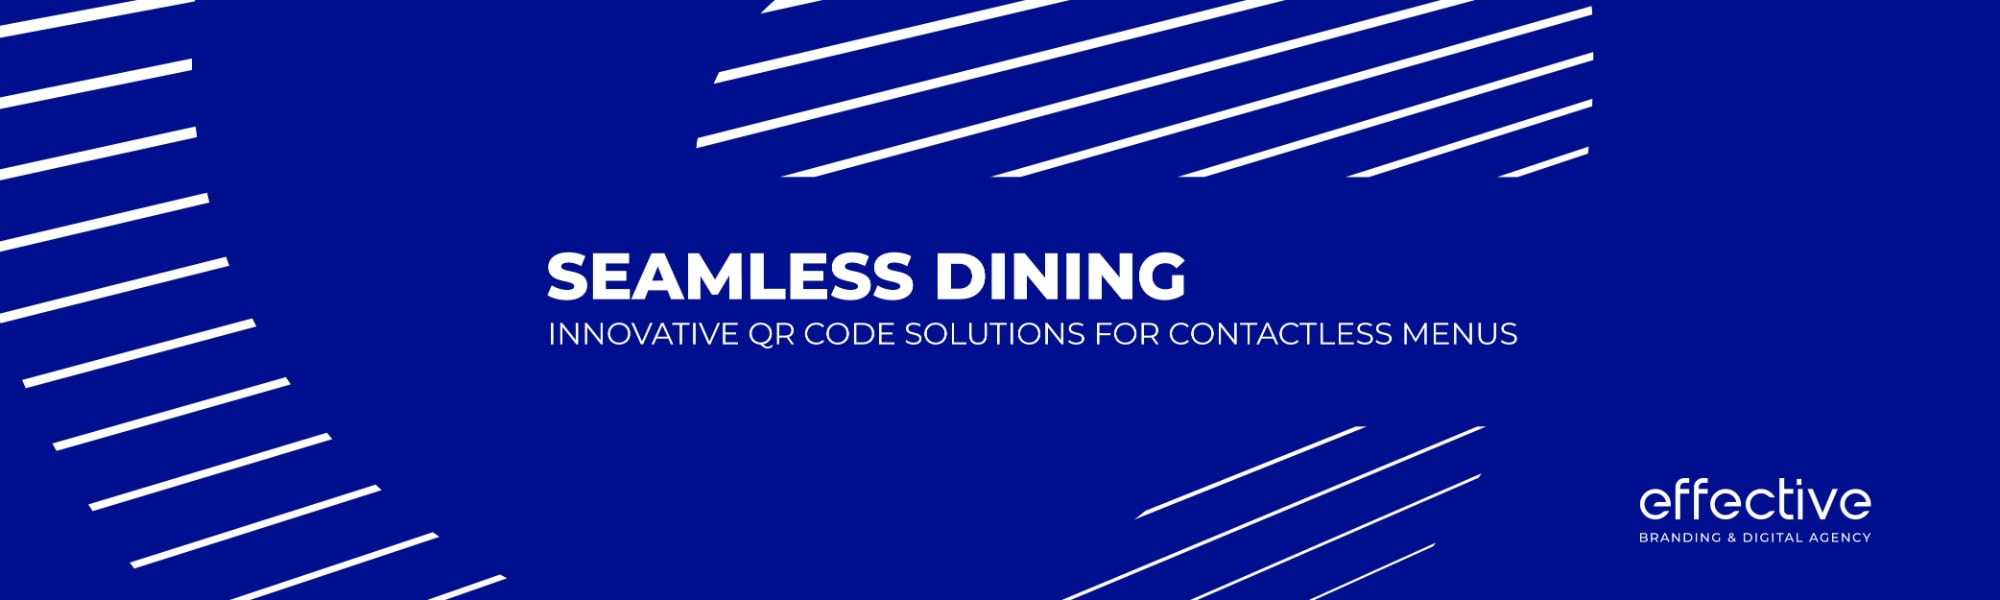 Seamless Dining Innovative QR Code Solutions for Contactless Menus